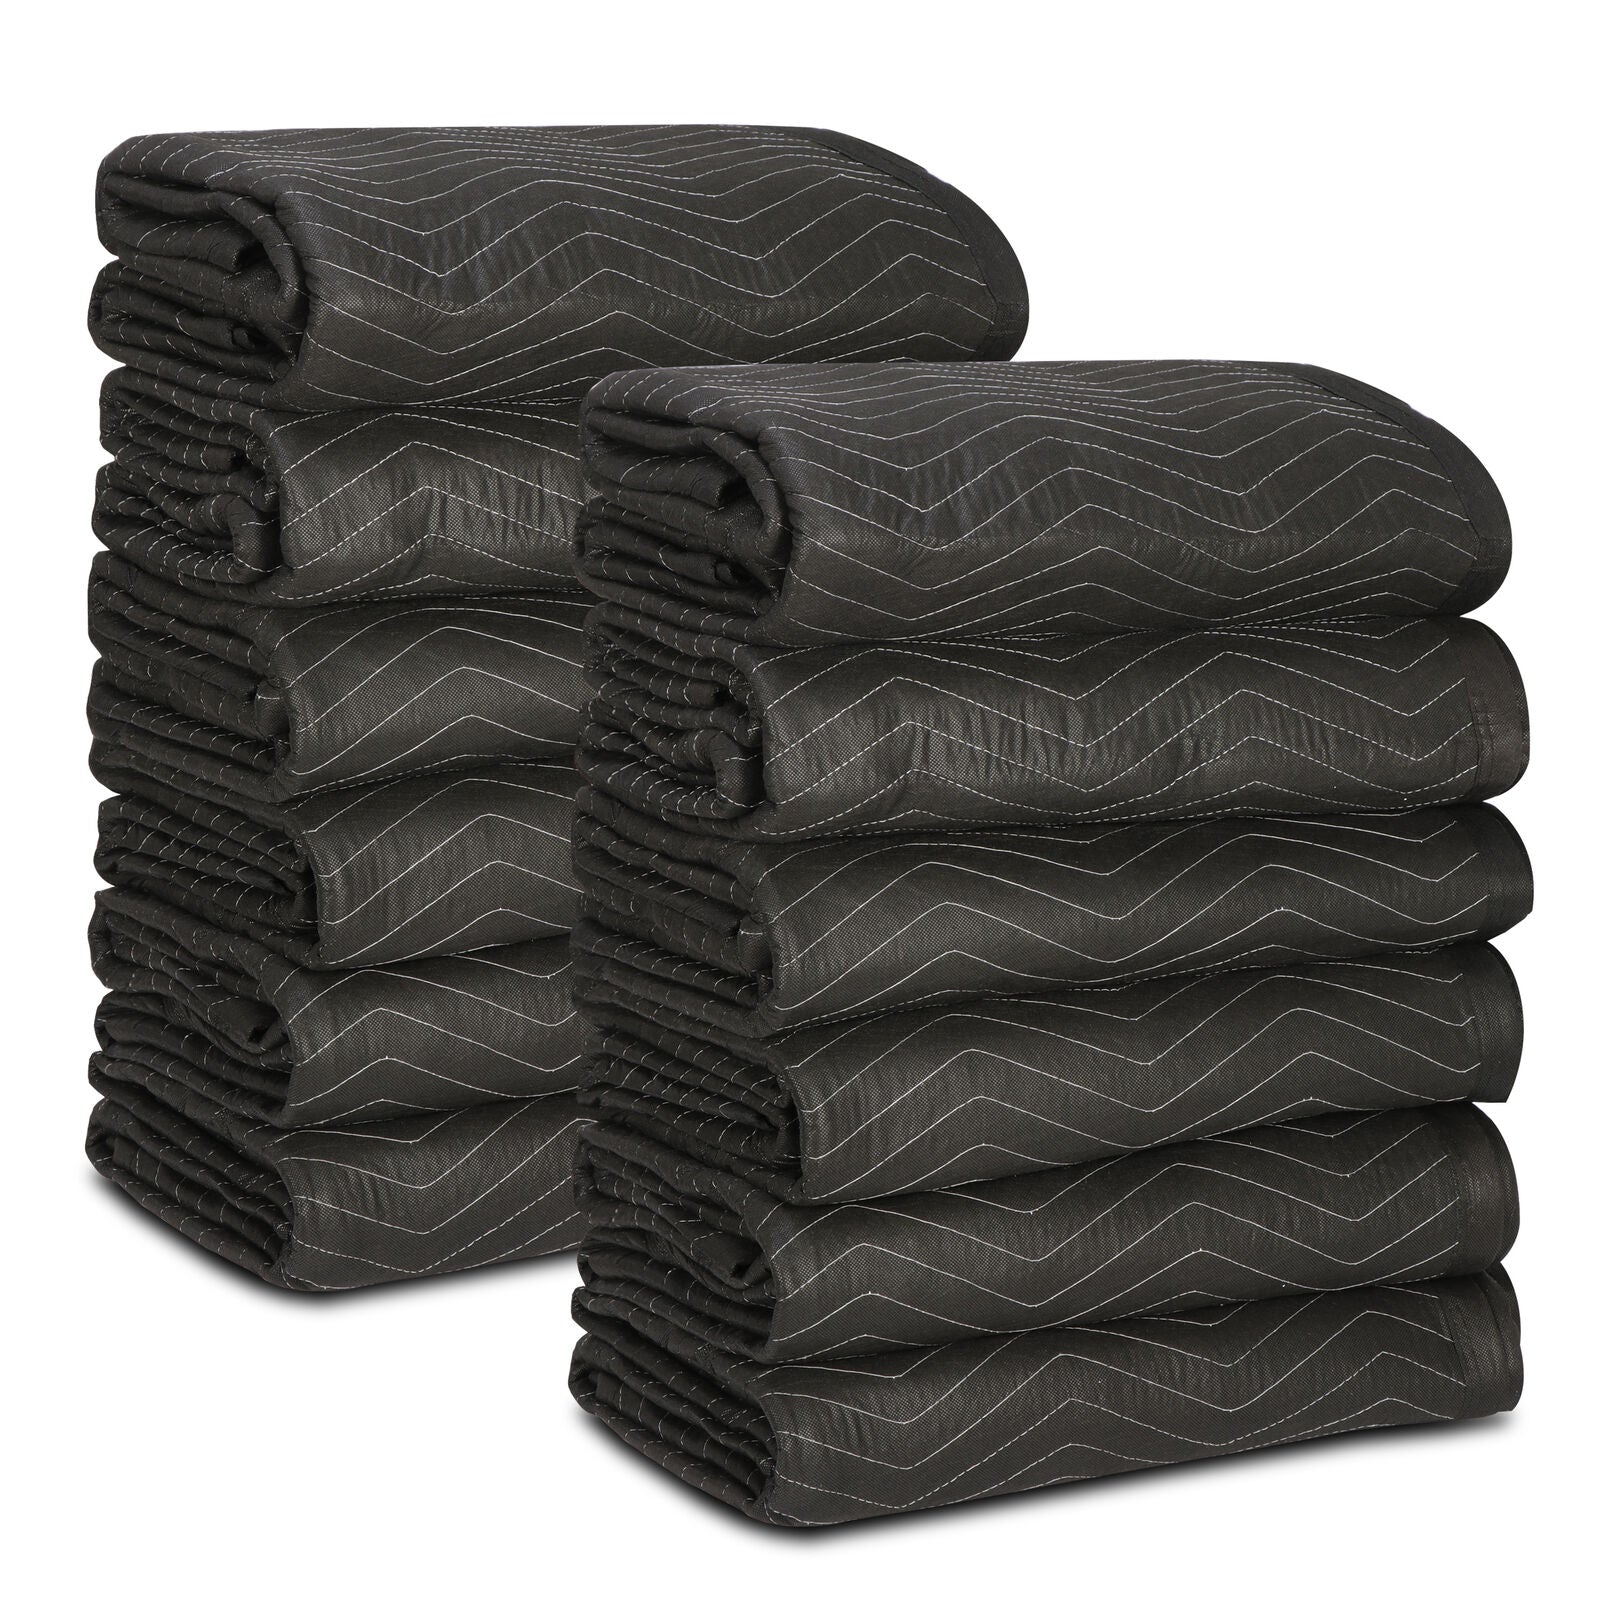 24 Pack Heavy Duty Moving Blankets 80